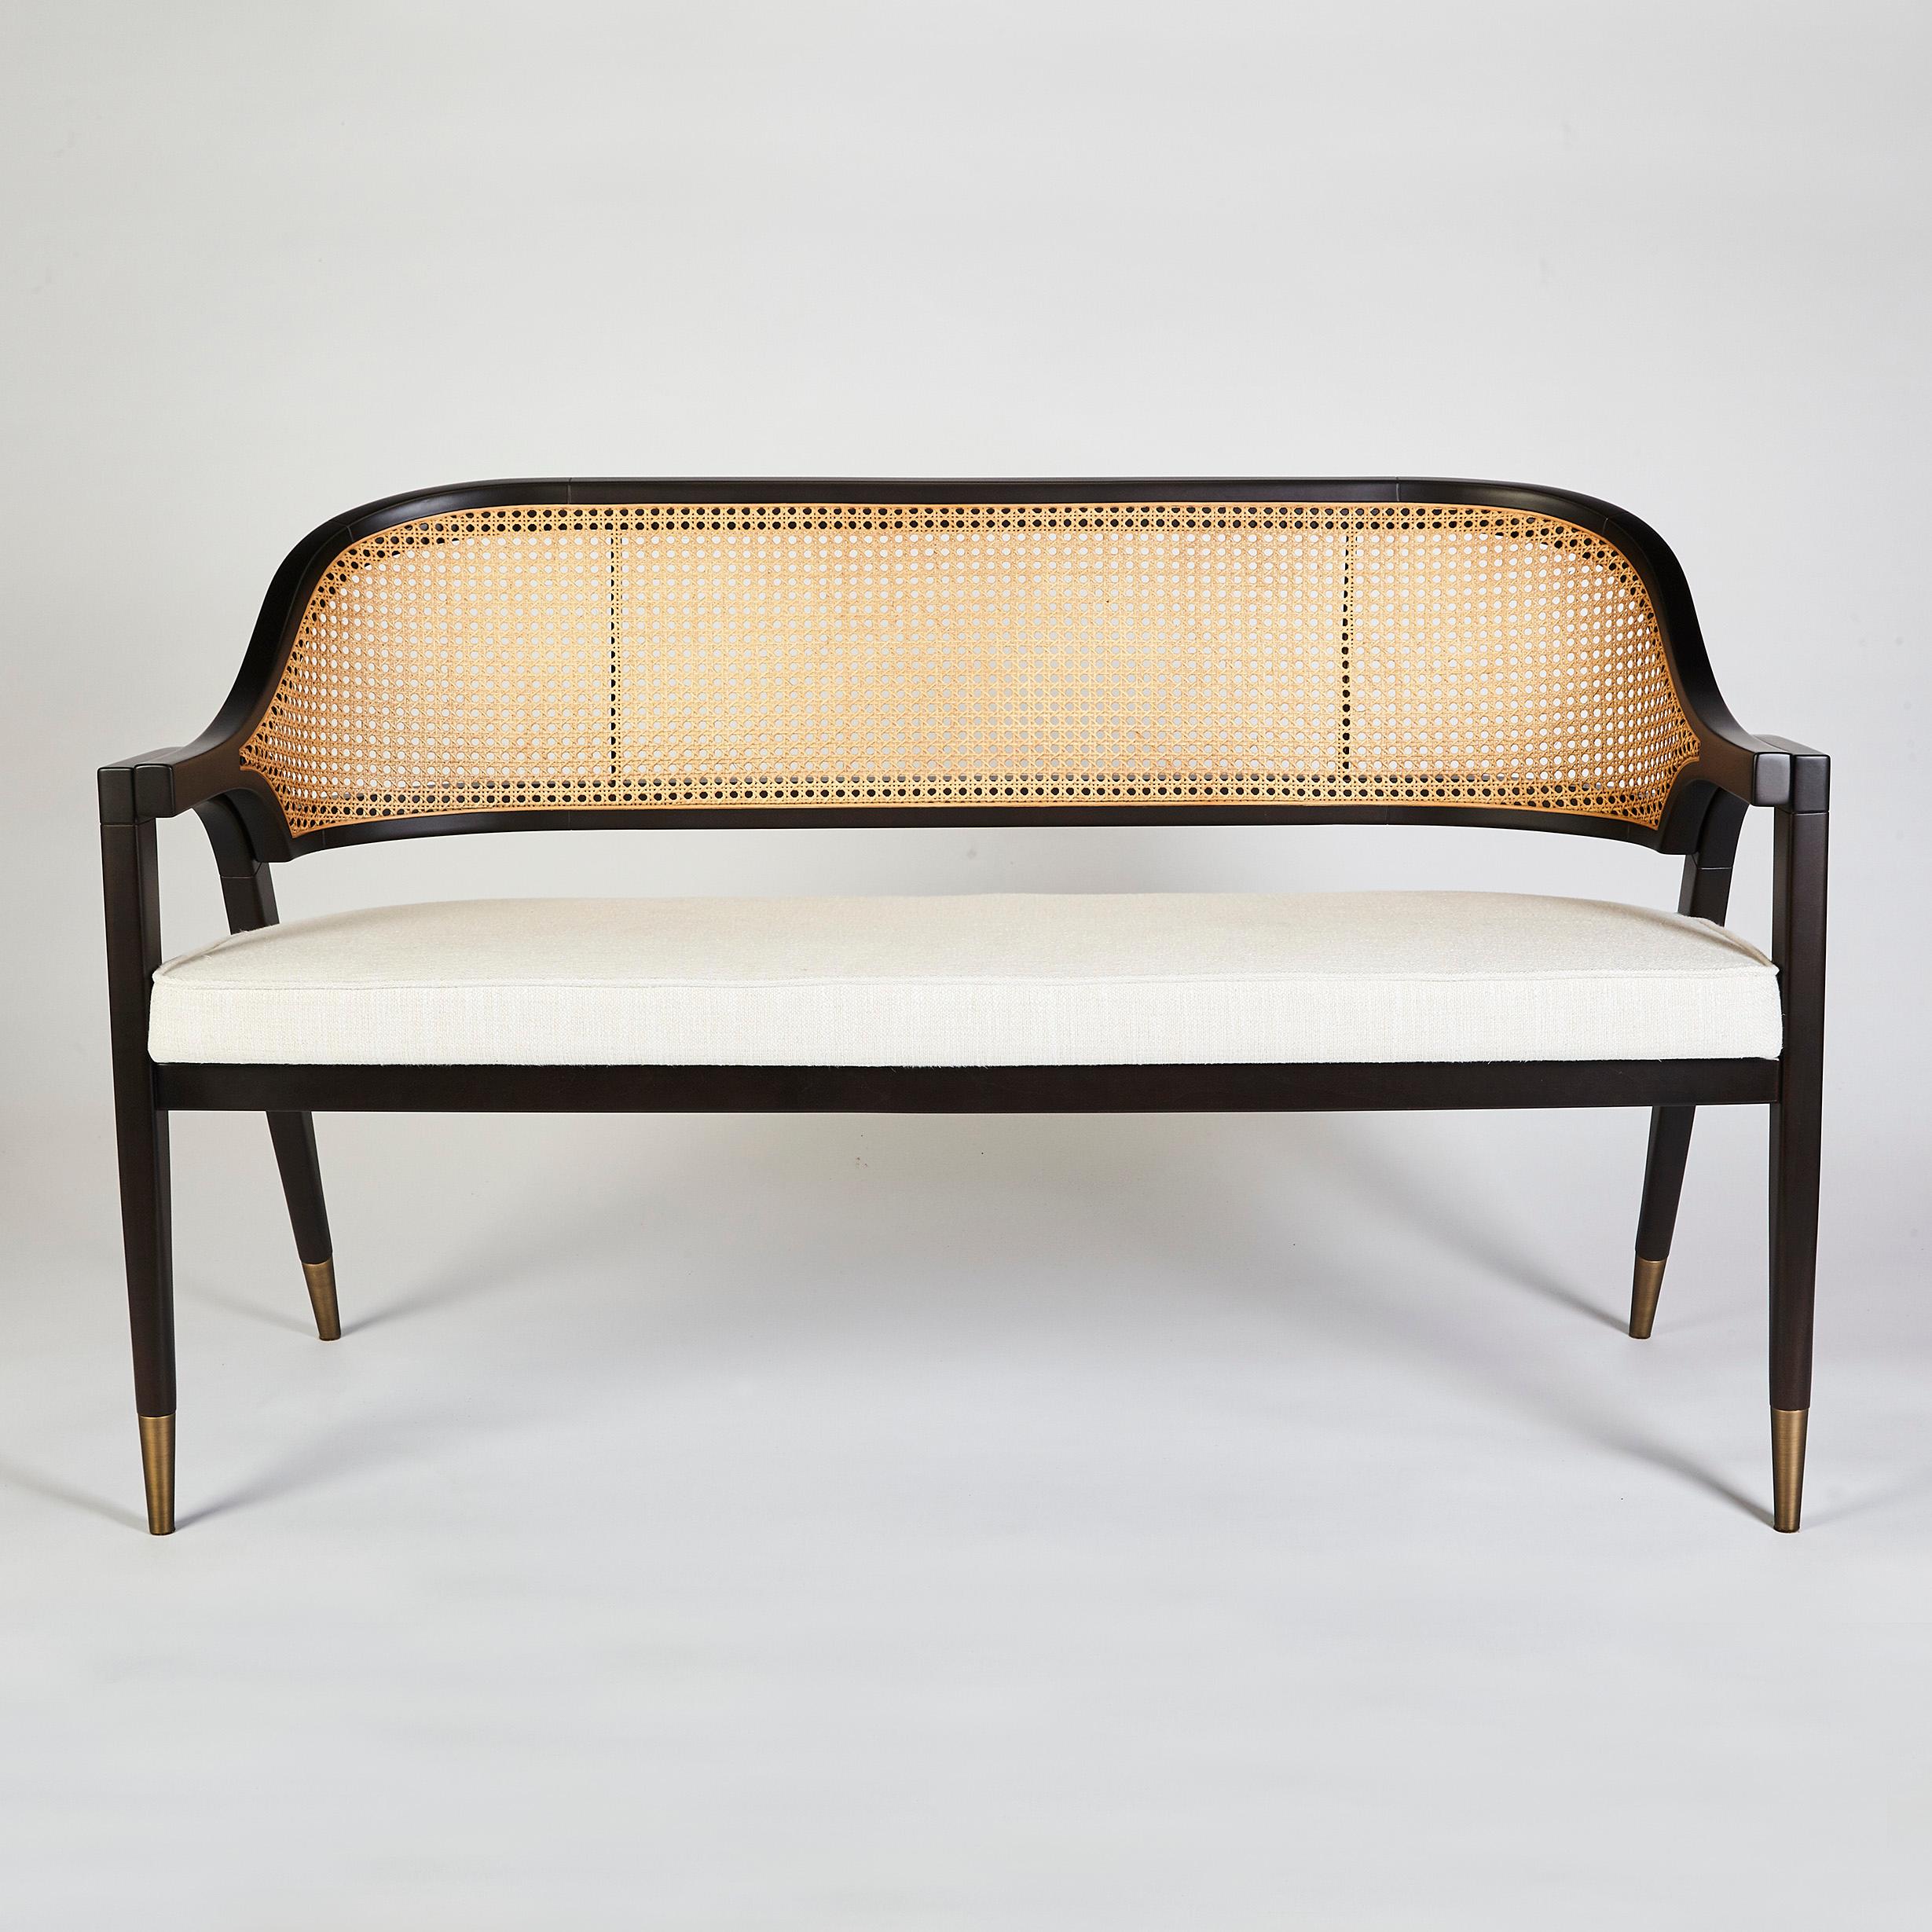 Wormley Bench by DUISTT 
Dimensions: W 132 x D 57 x H 81 cm
Materials: Duistt Fabric, Darkened Sikomoro, Natural Cane and Brass details
Other finishes are available. Please contact us for any request.

Wormley bench pays a tribute to American design